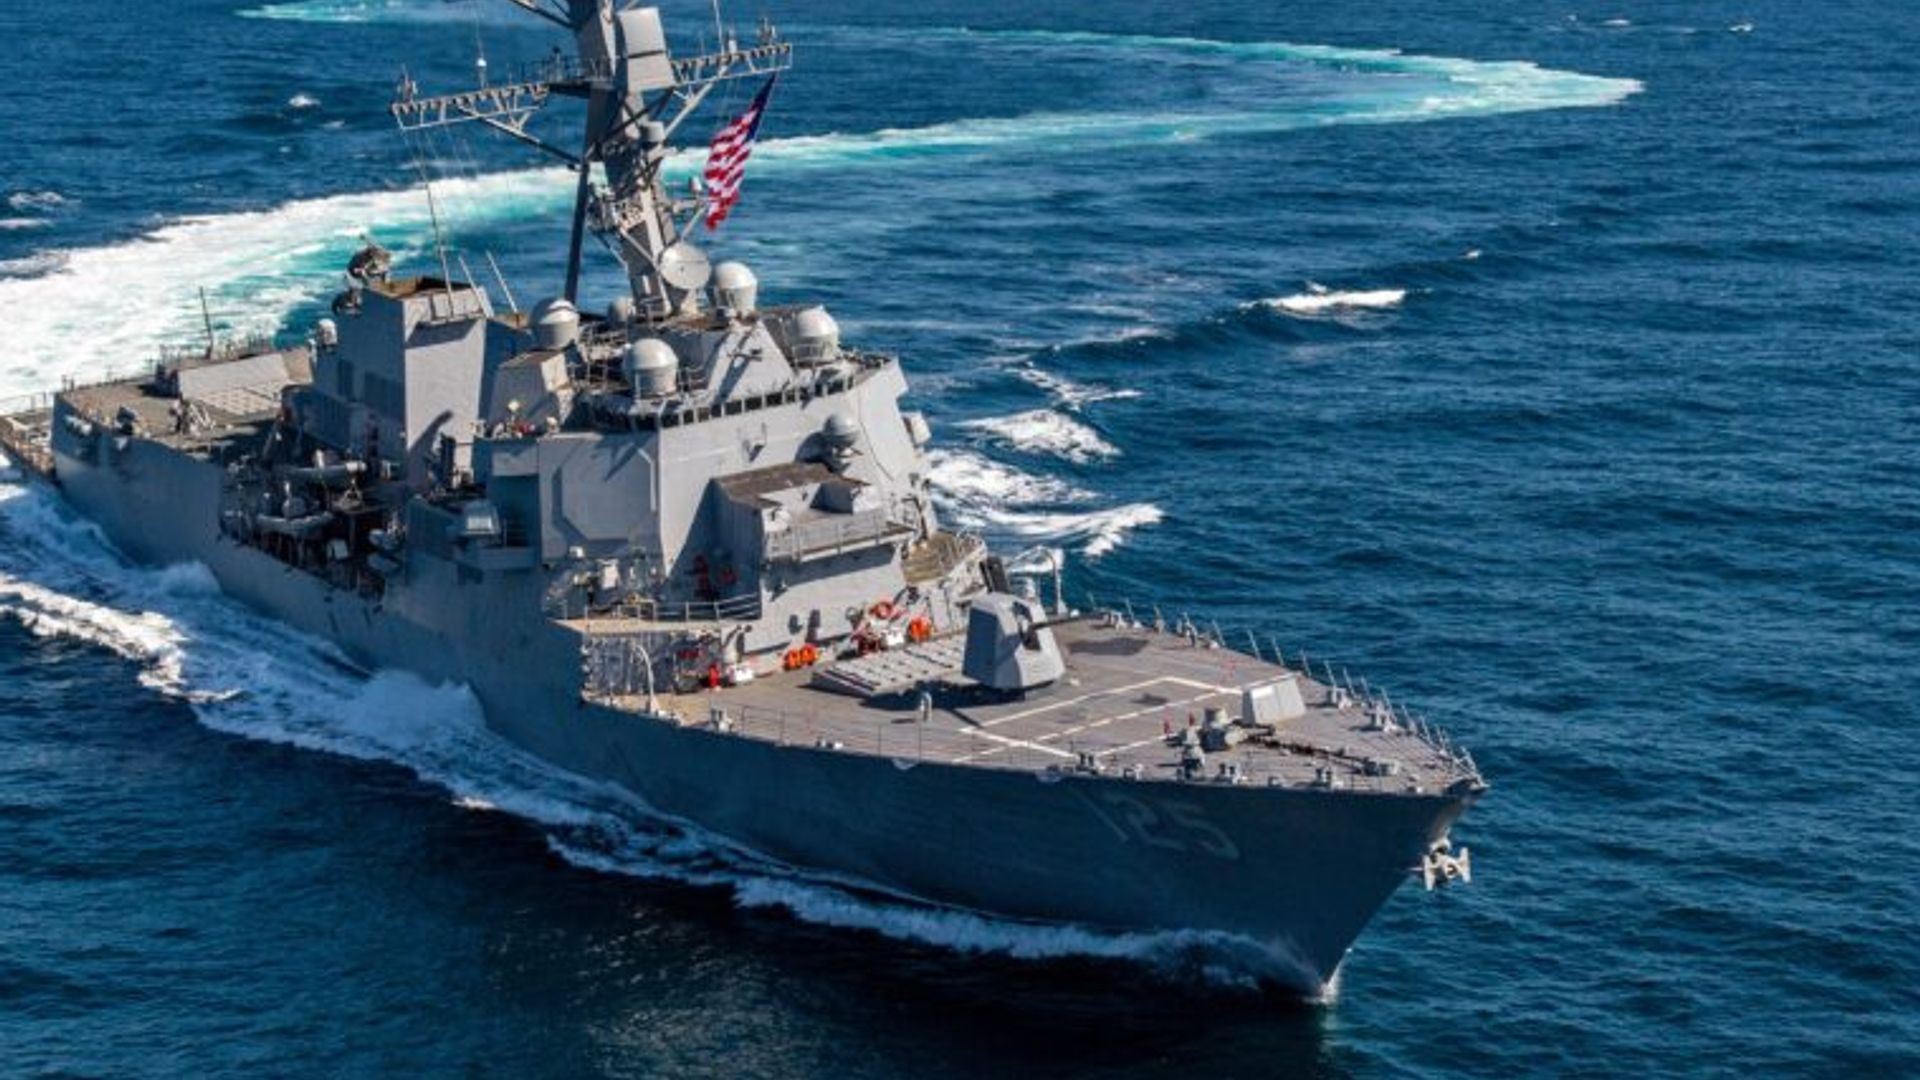 The U.S. Navy is now in possession of its newest guided-missile destroyer, DDG 125, also called the Jack Lucas.